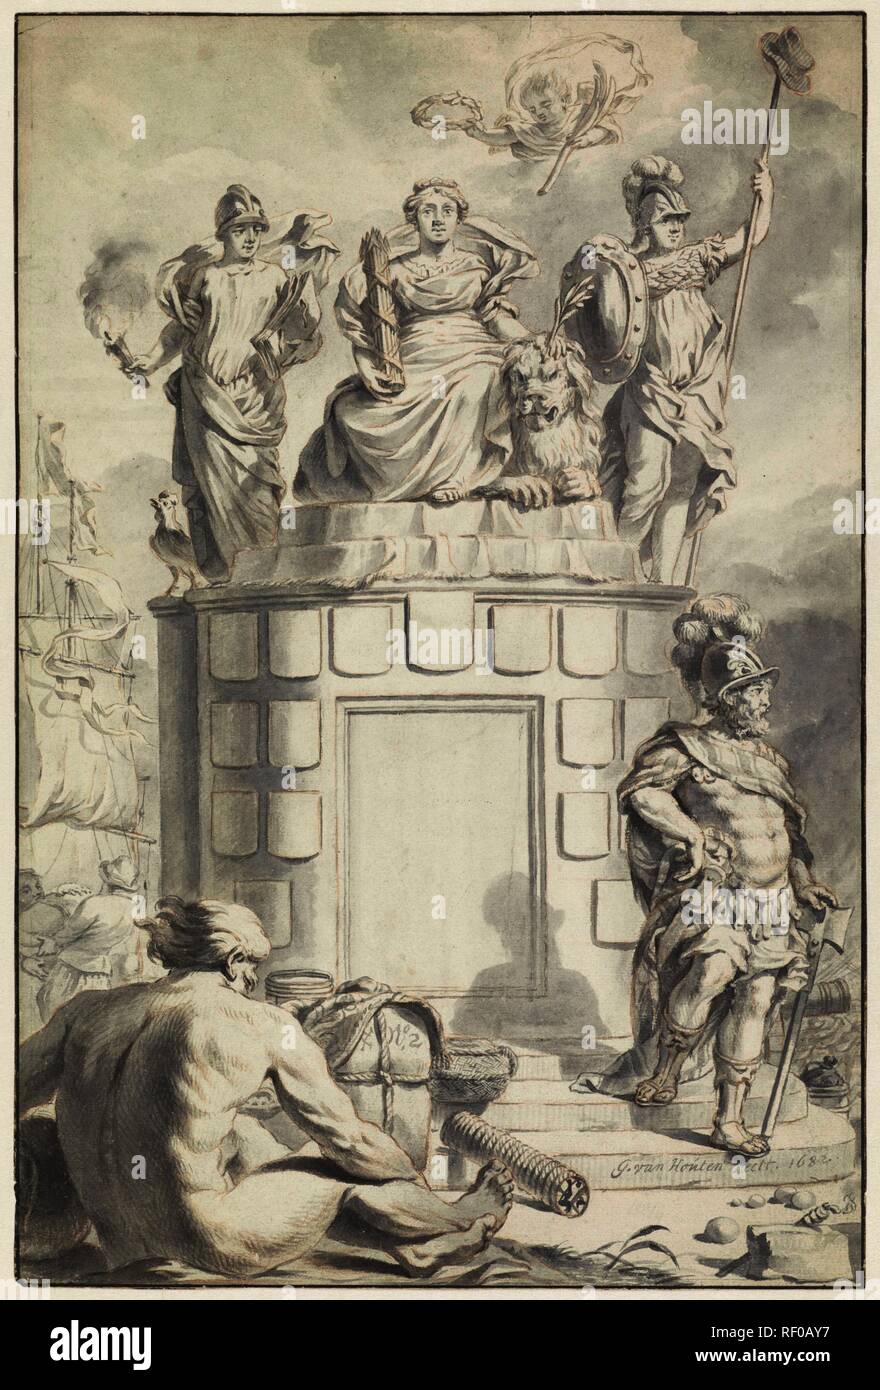 Design for a title print with the Dutch virgin (?). Draughtsman: Gerard van Houten. Dating: 1682. Measurements: h 450 mm × w 301 mm. Museum: Rijksmuseum, Amsterdam. Stock Photo